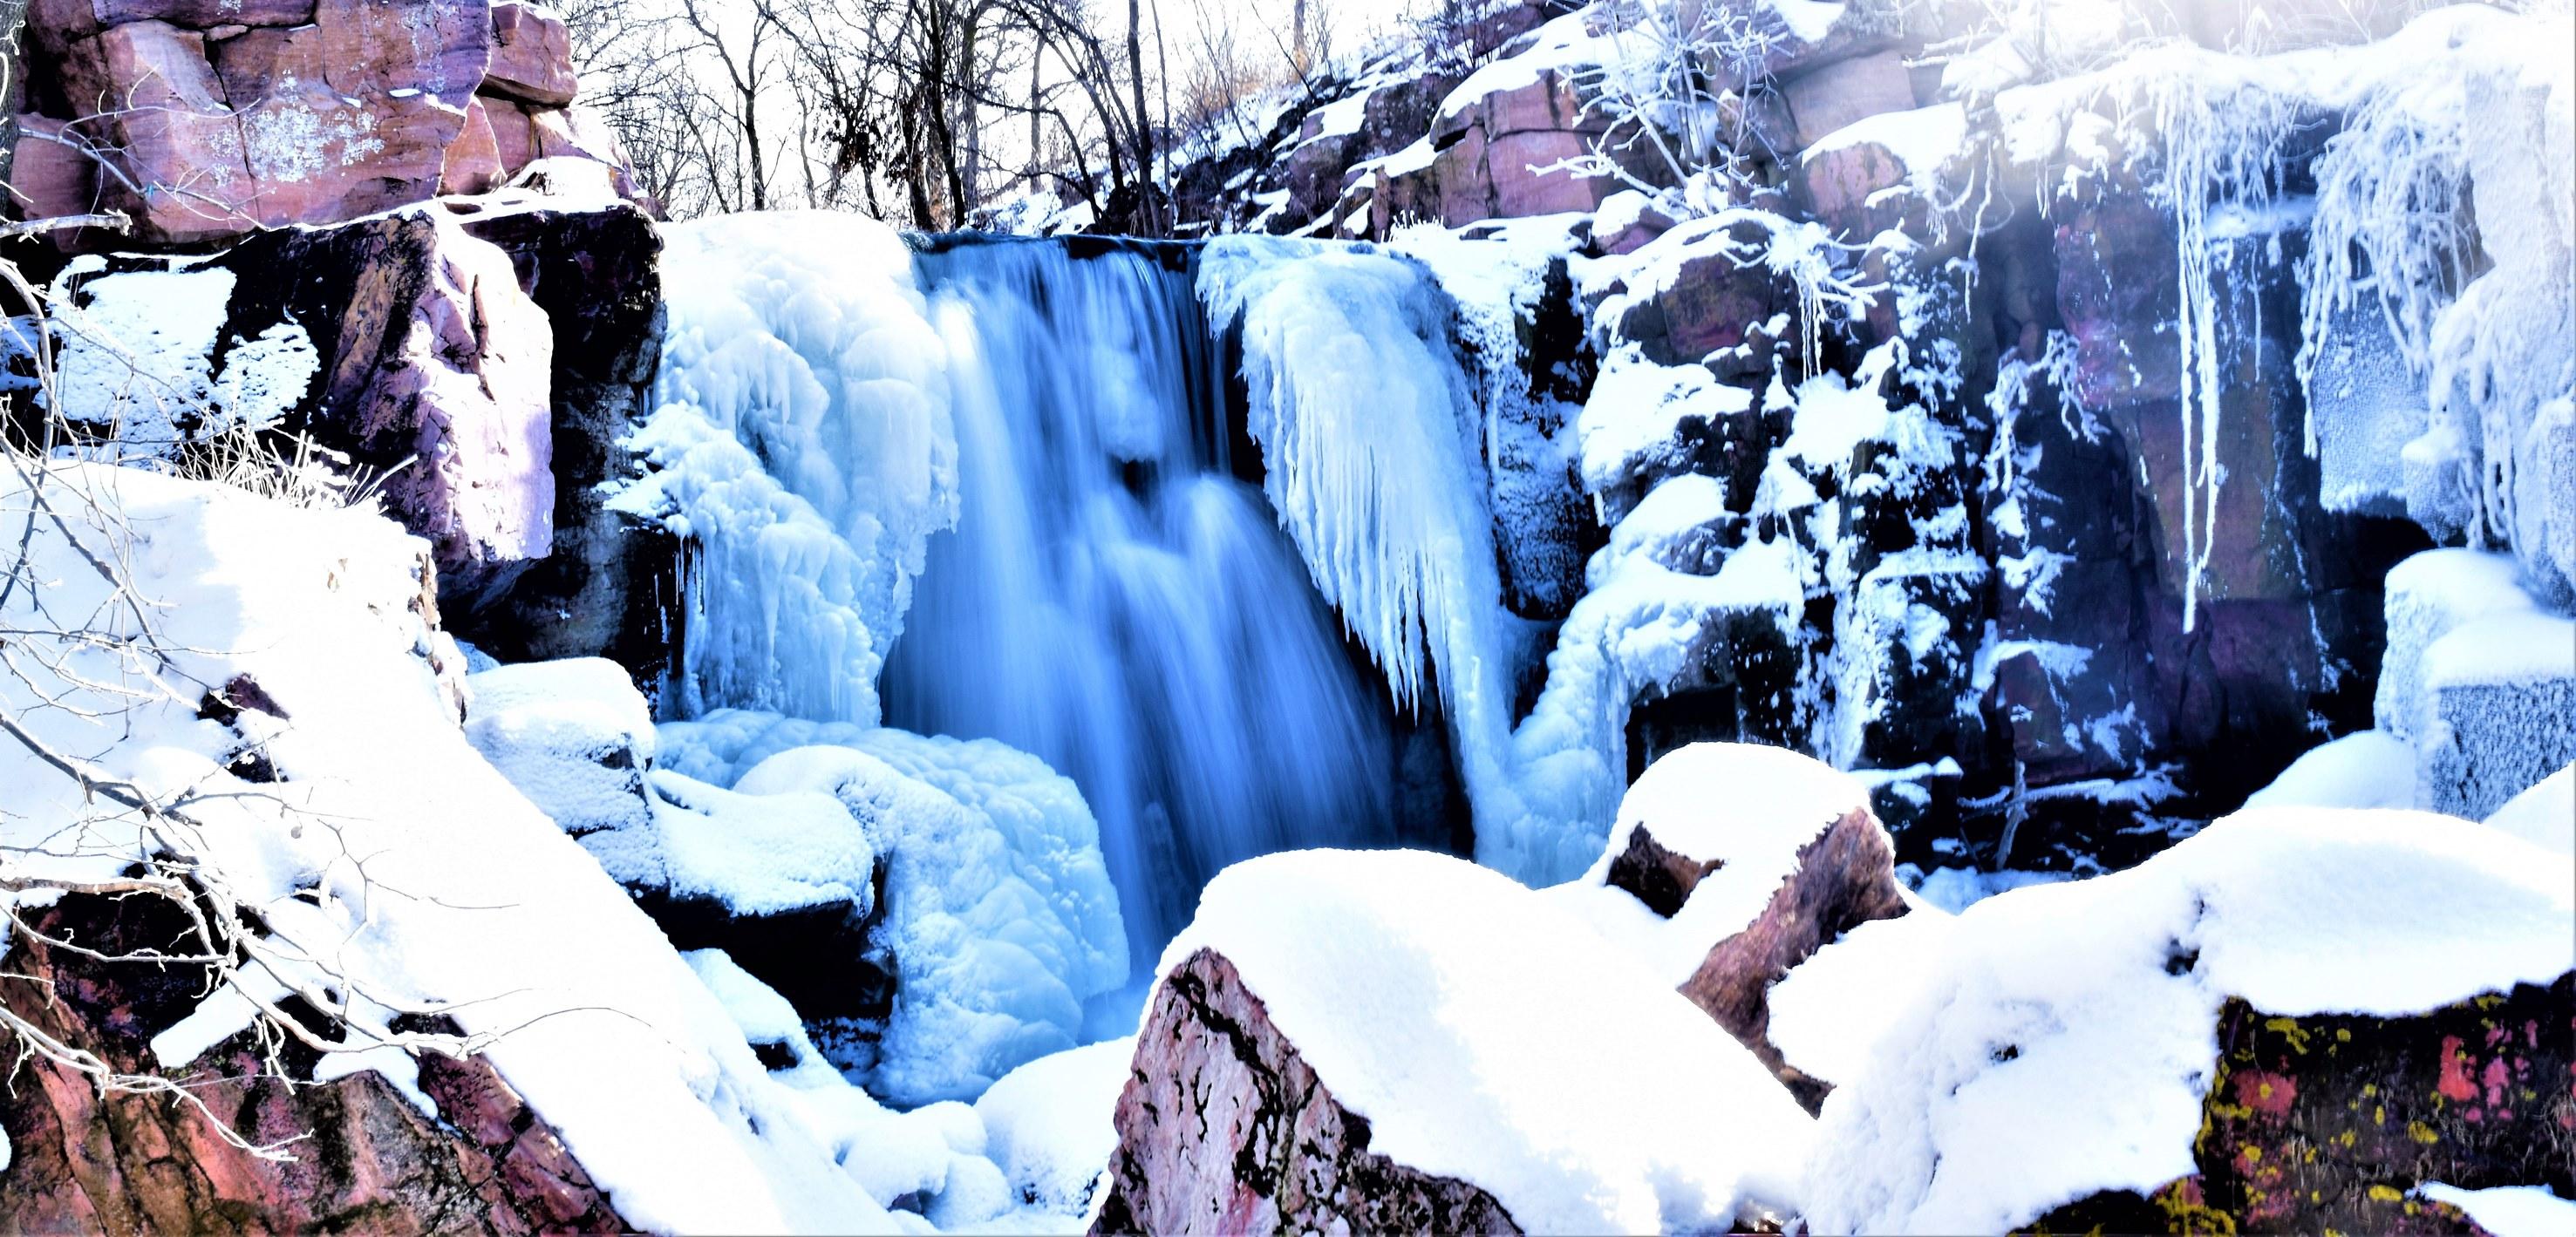 A waterfall partially surrounded by ice